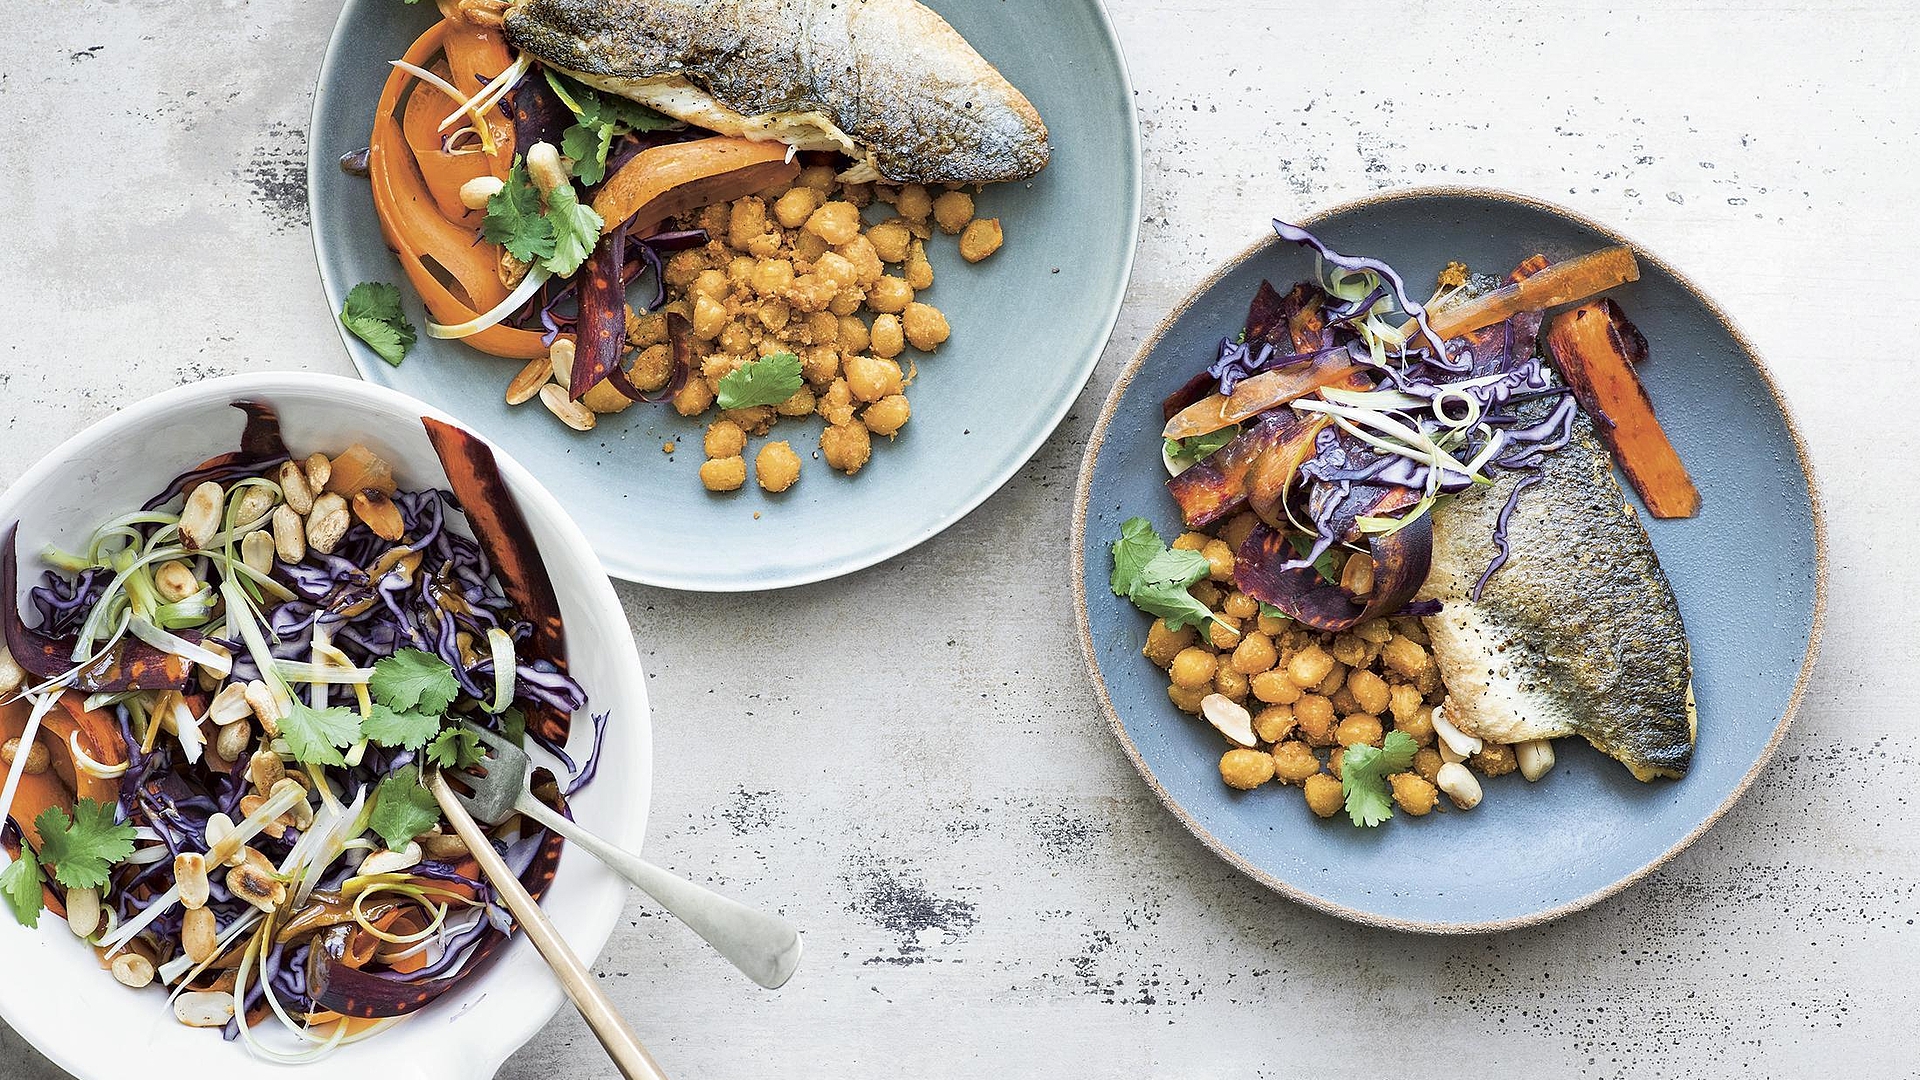 Sea bass with a sesame chickpea cabbage slaw